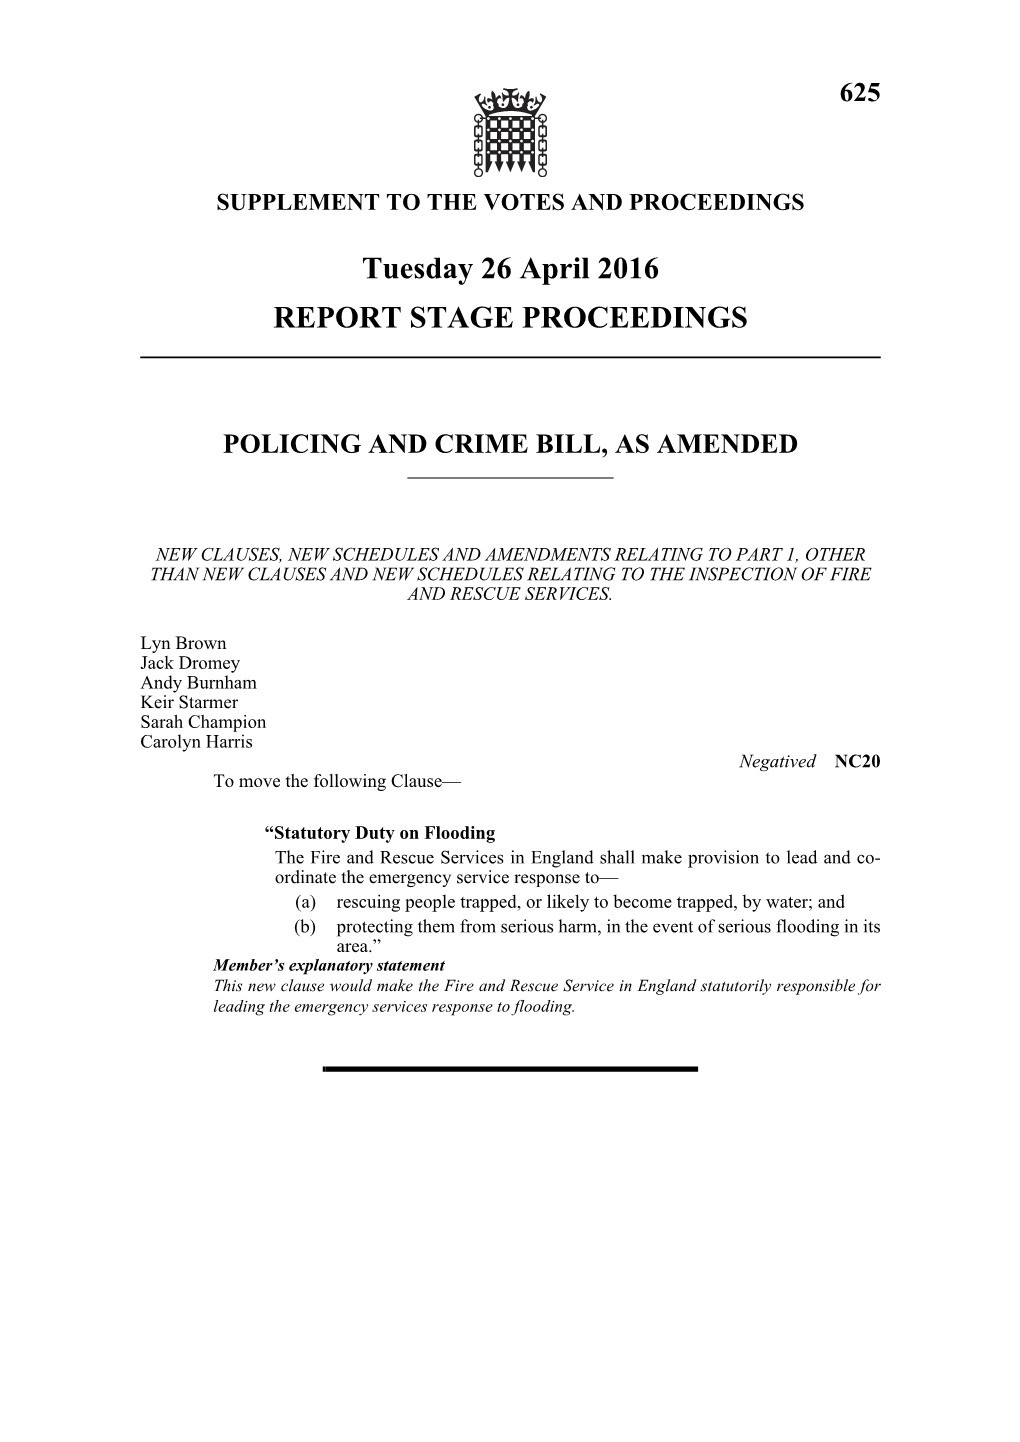 Tuesday 26 April 2016 REPORT STAGE PROCEEDINGS